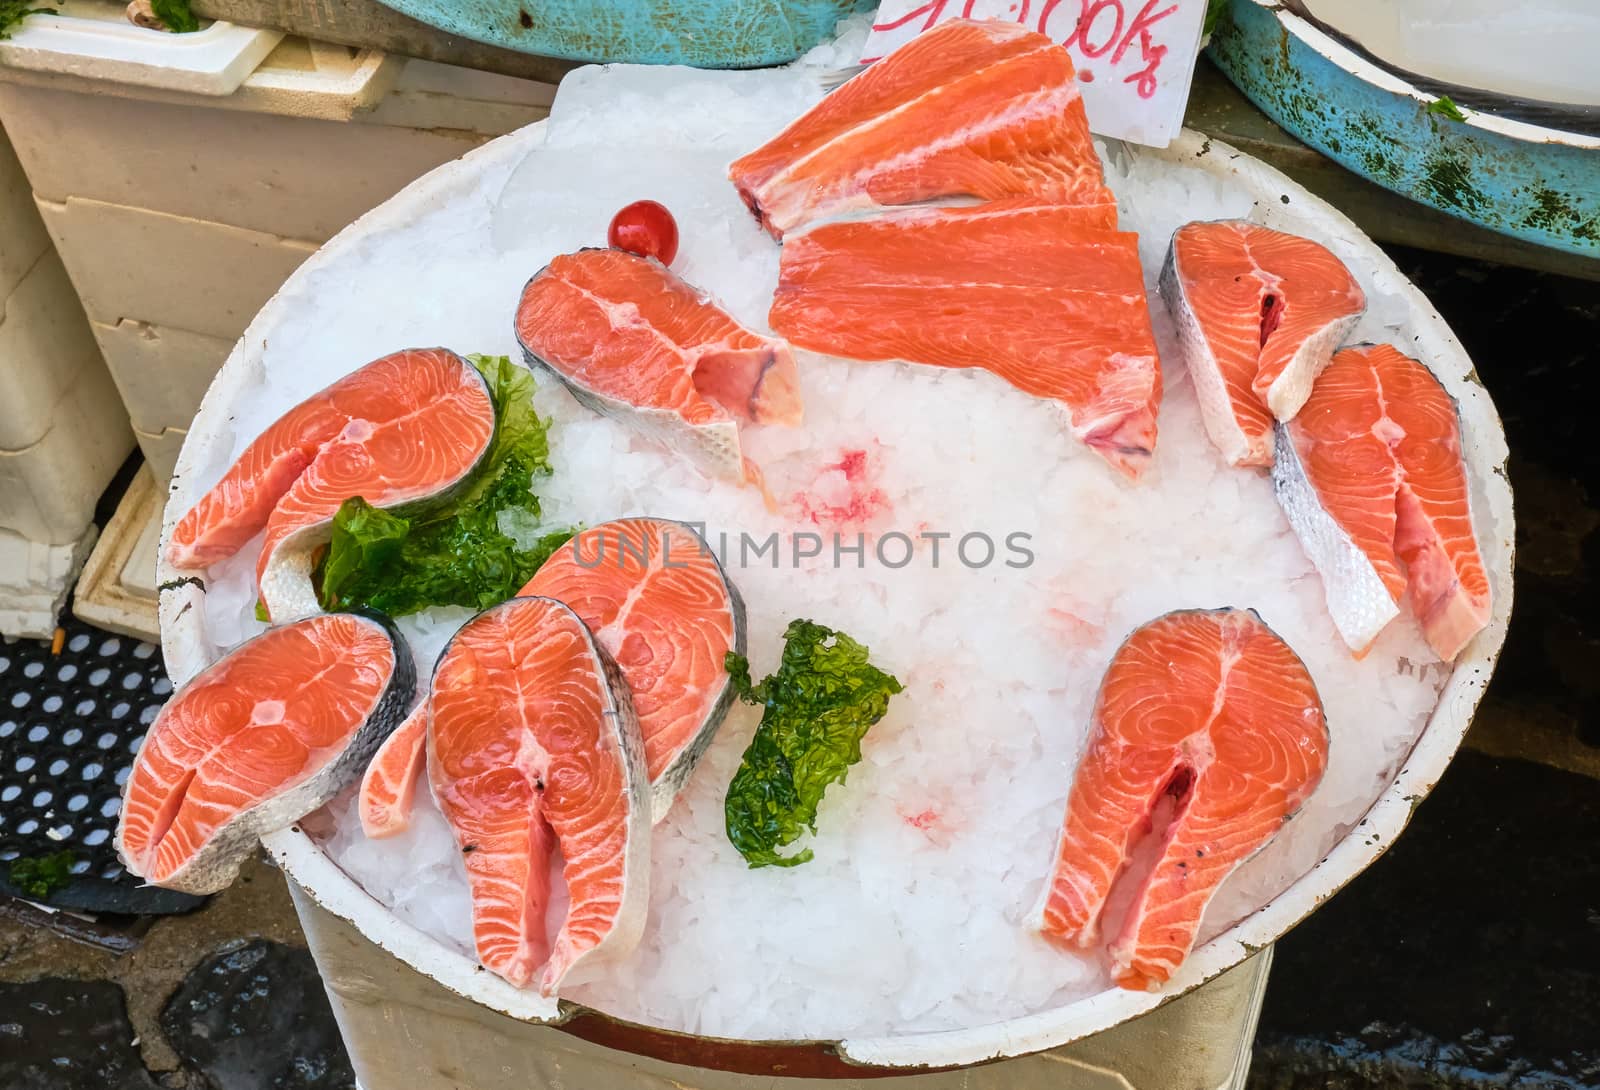 Fresh salmon for sale at a market in Naples, Italy